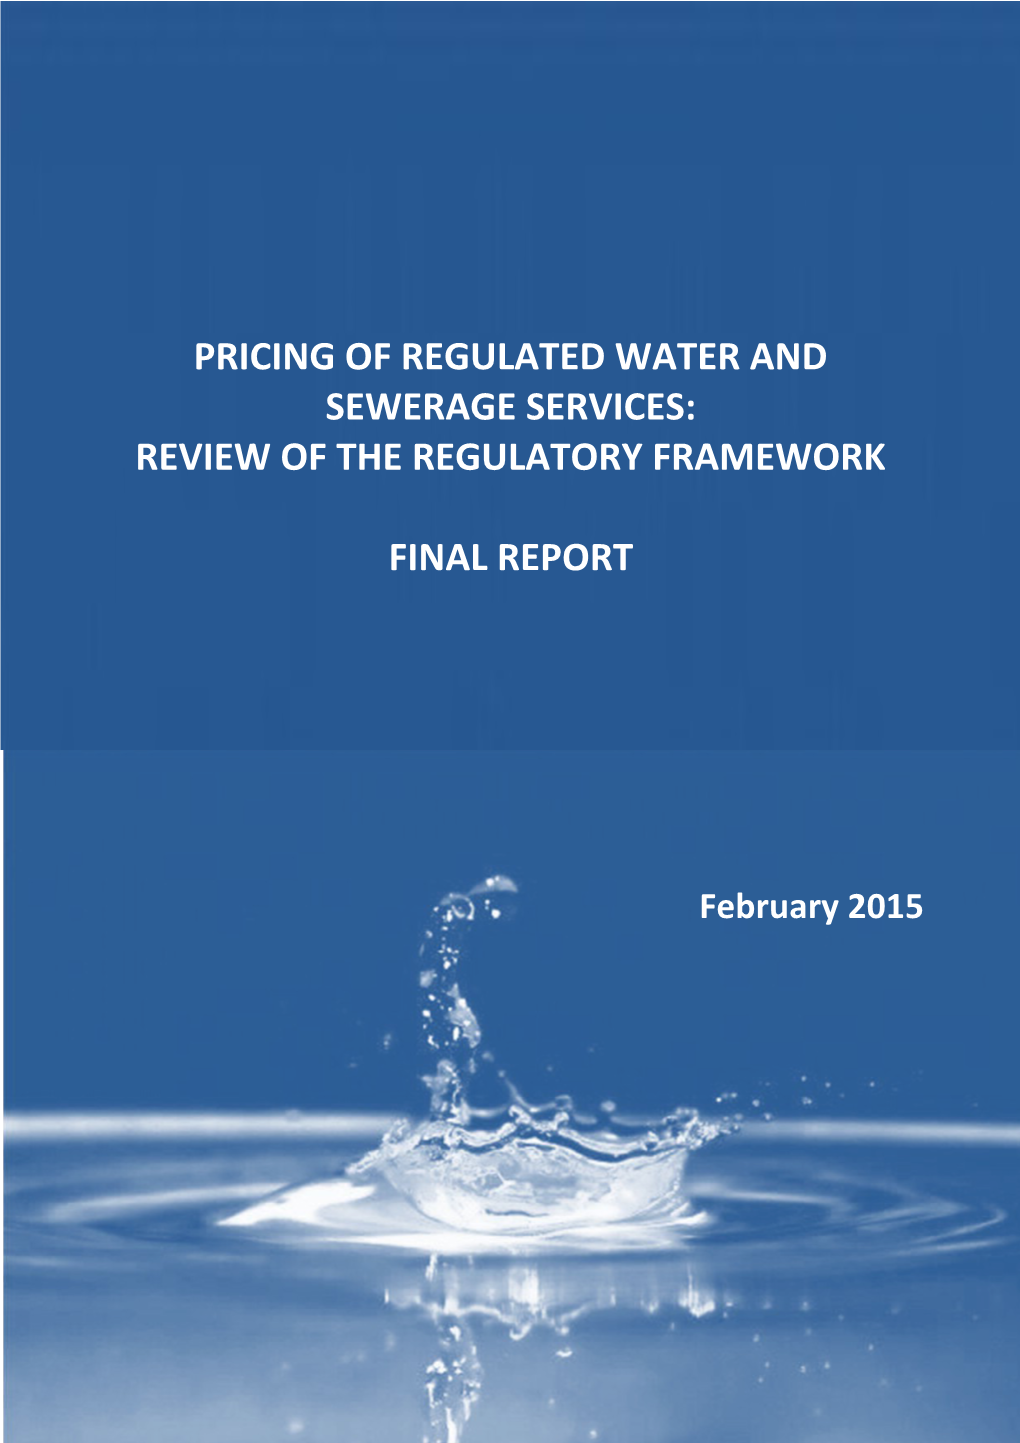 Pricing of Regulated Water and Sewerage Services